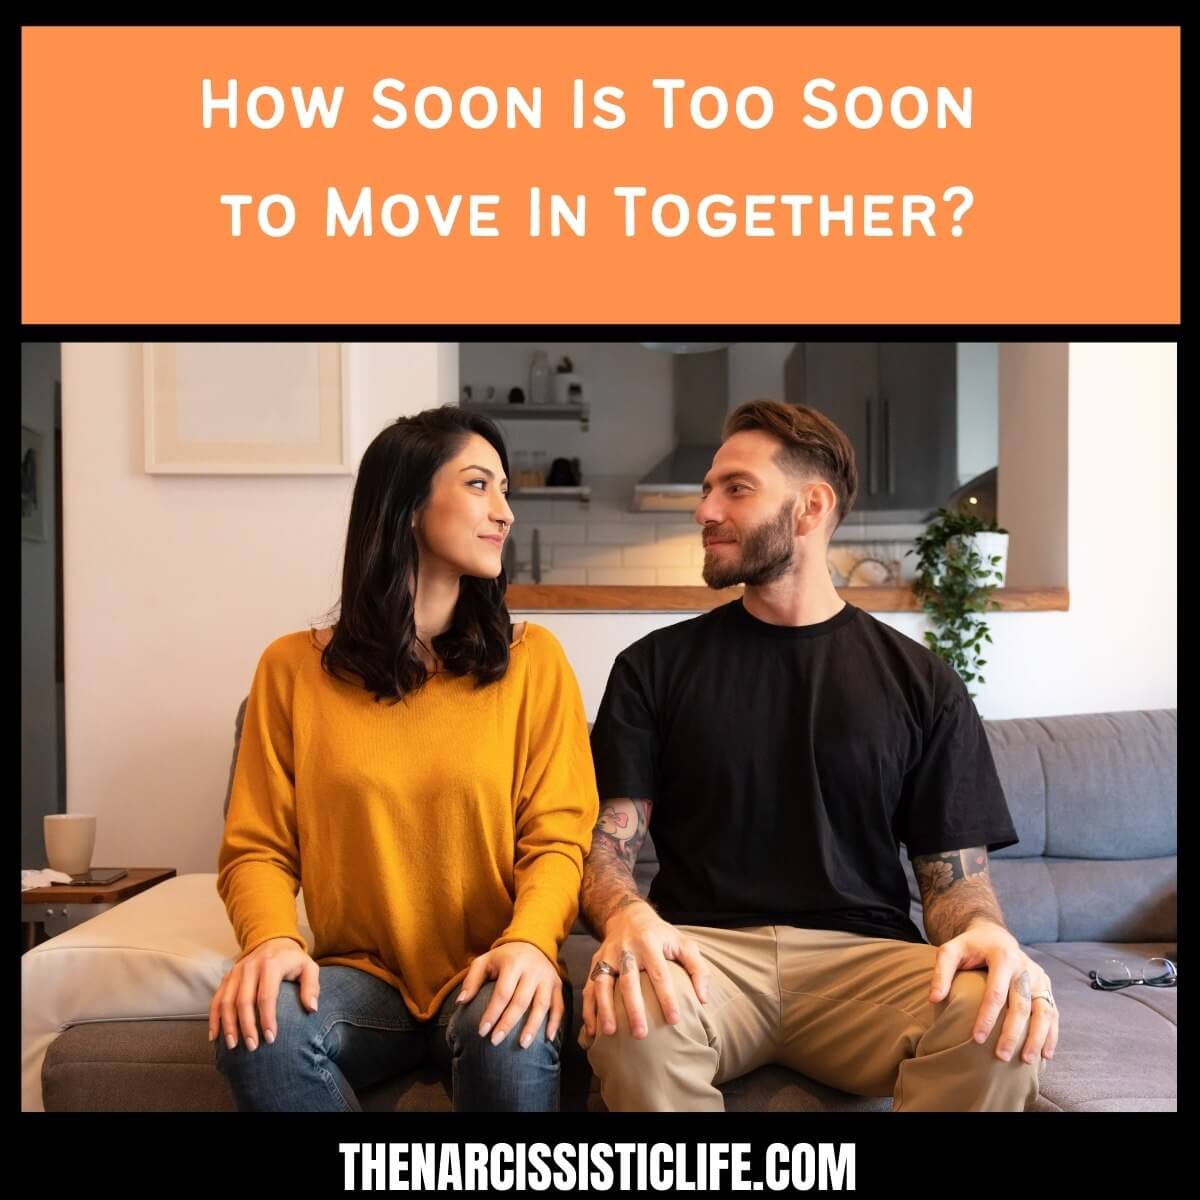 How Soon Is Too Soon to Move In Together?